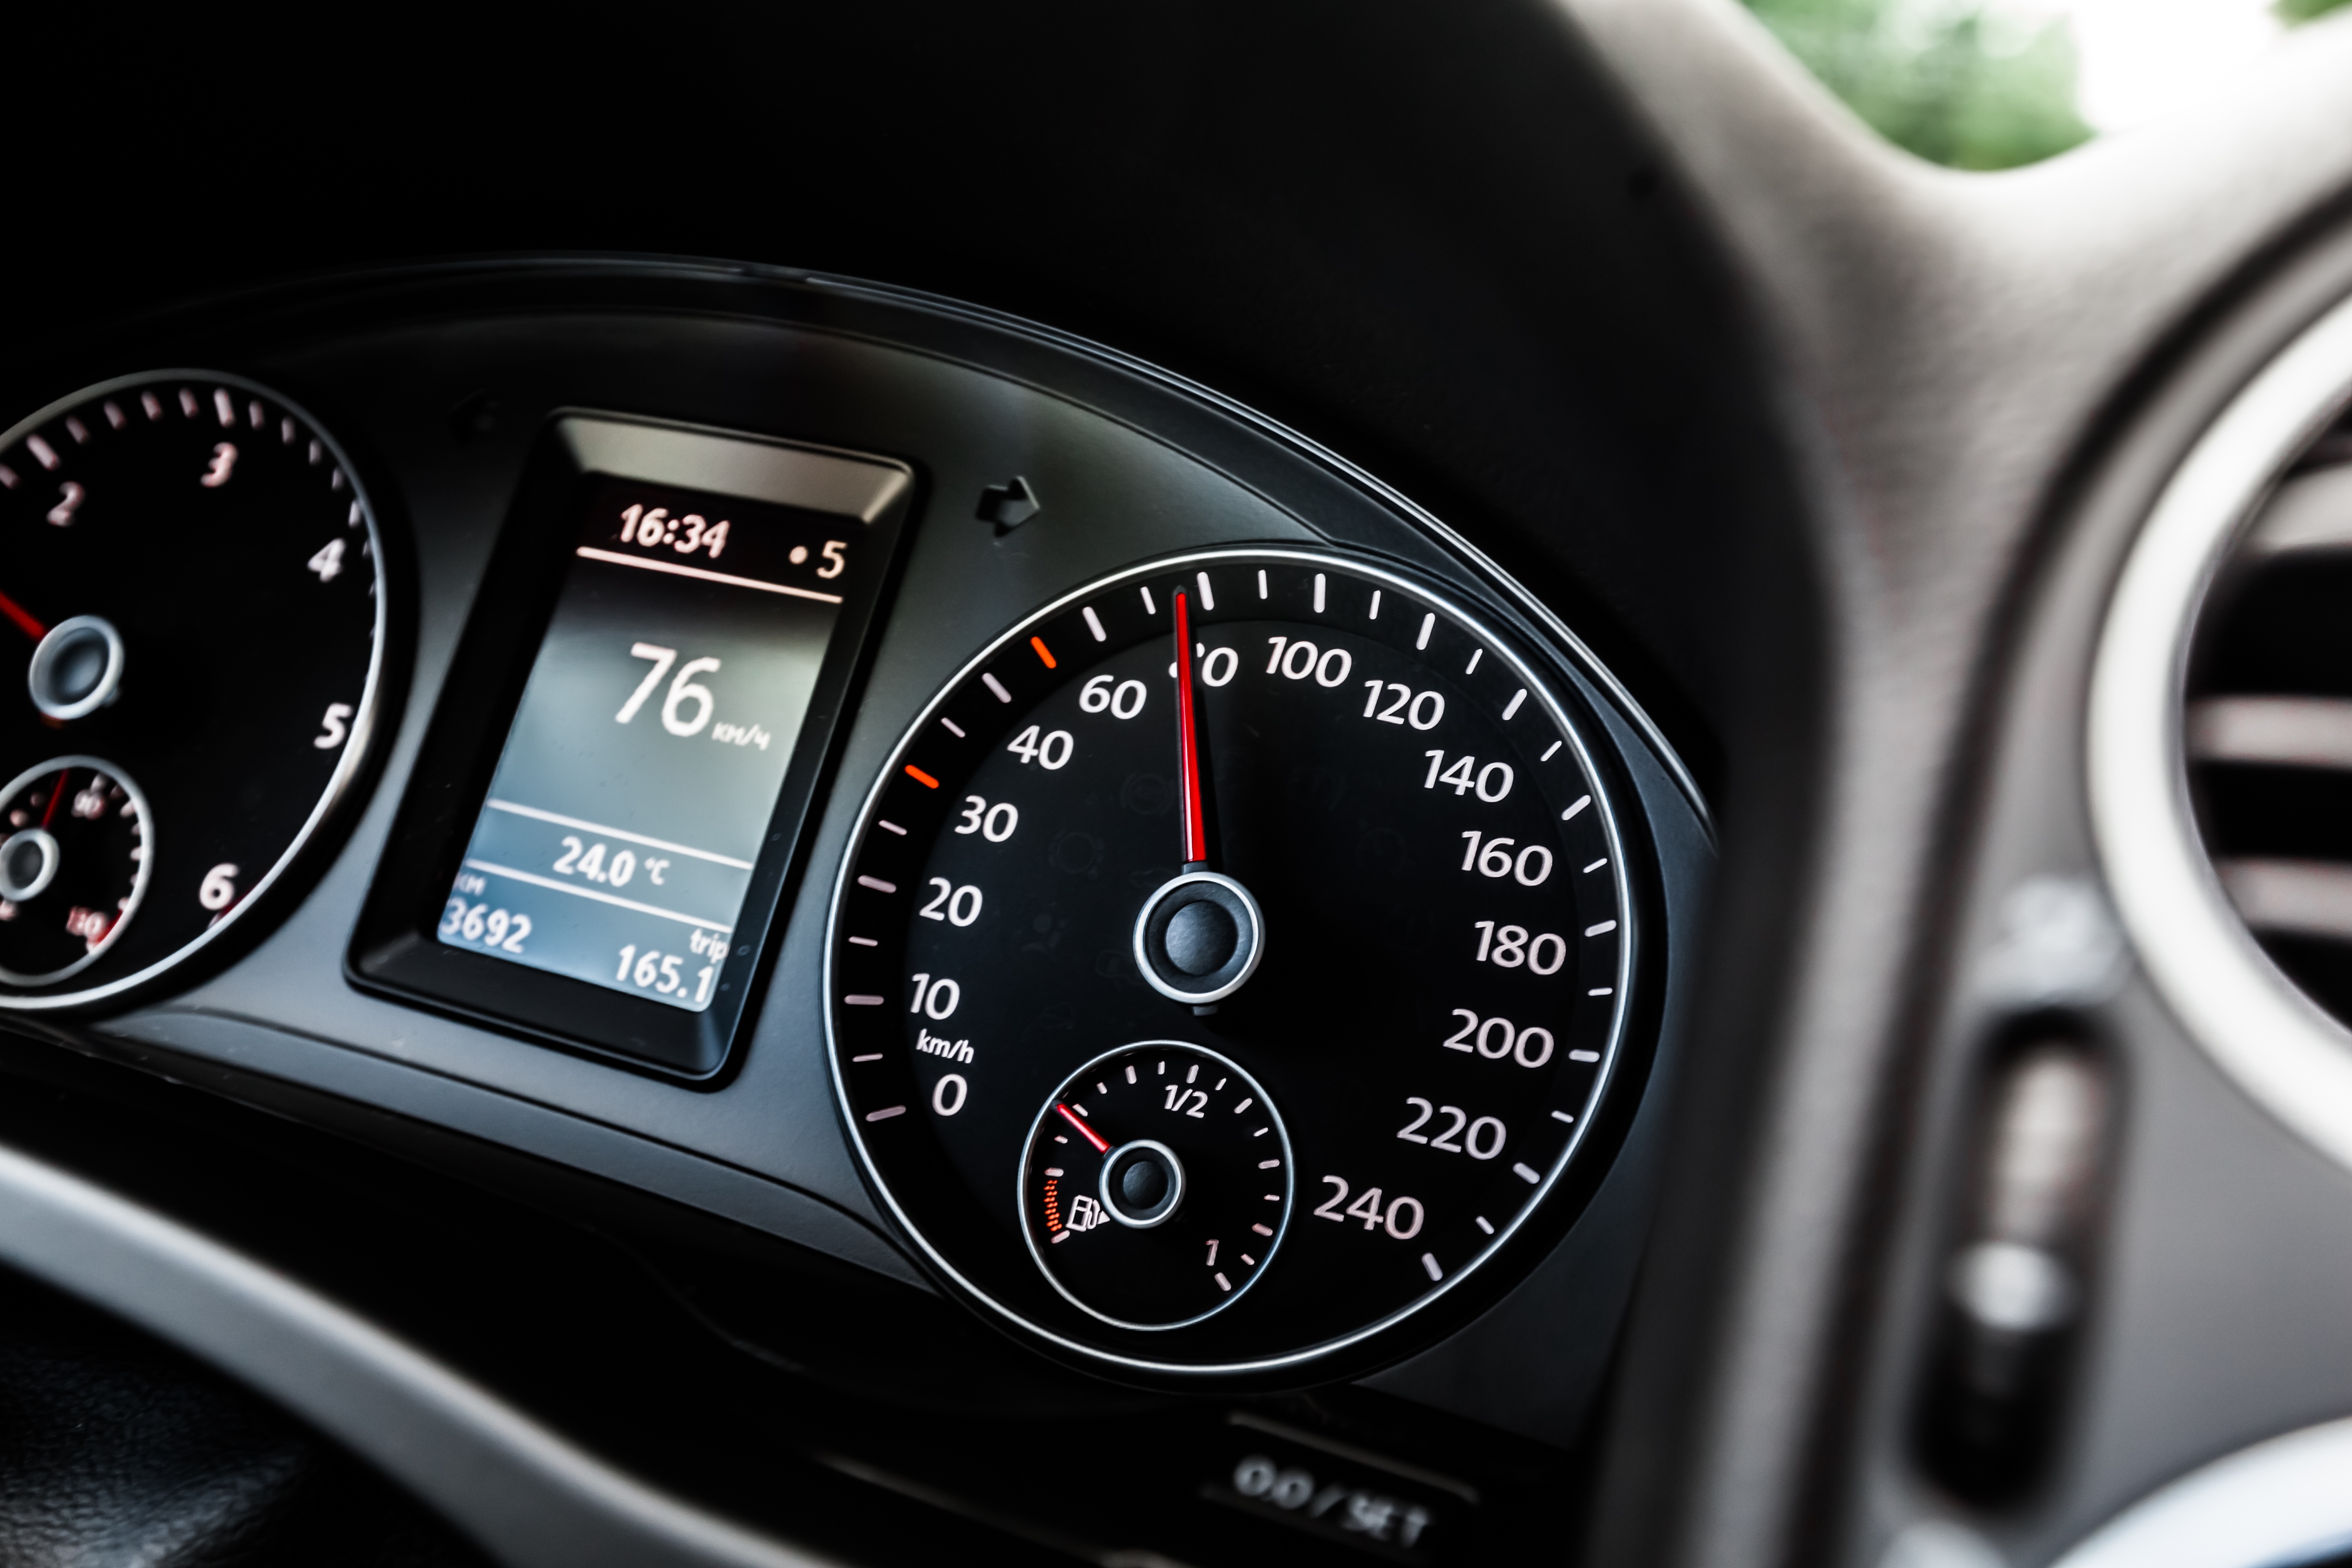 The Bosch IoT Lab explores whether blockchain can help prevent odometer fraud